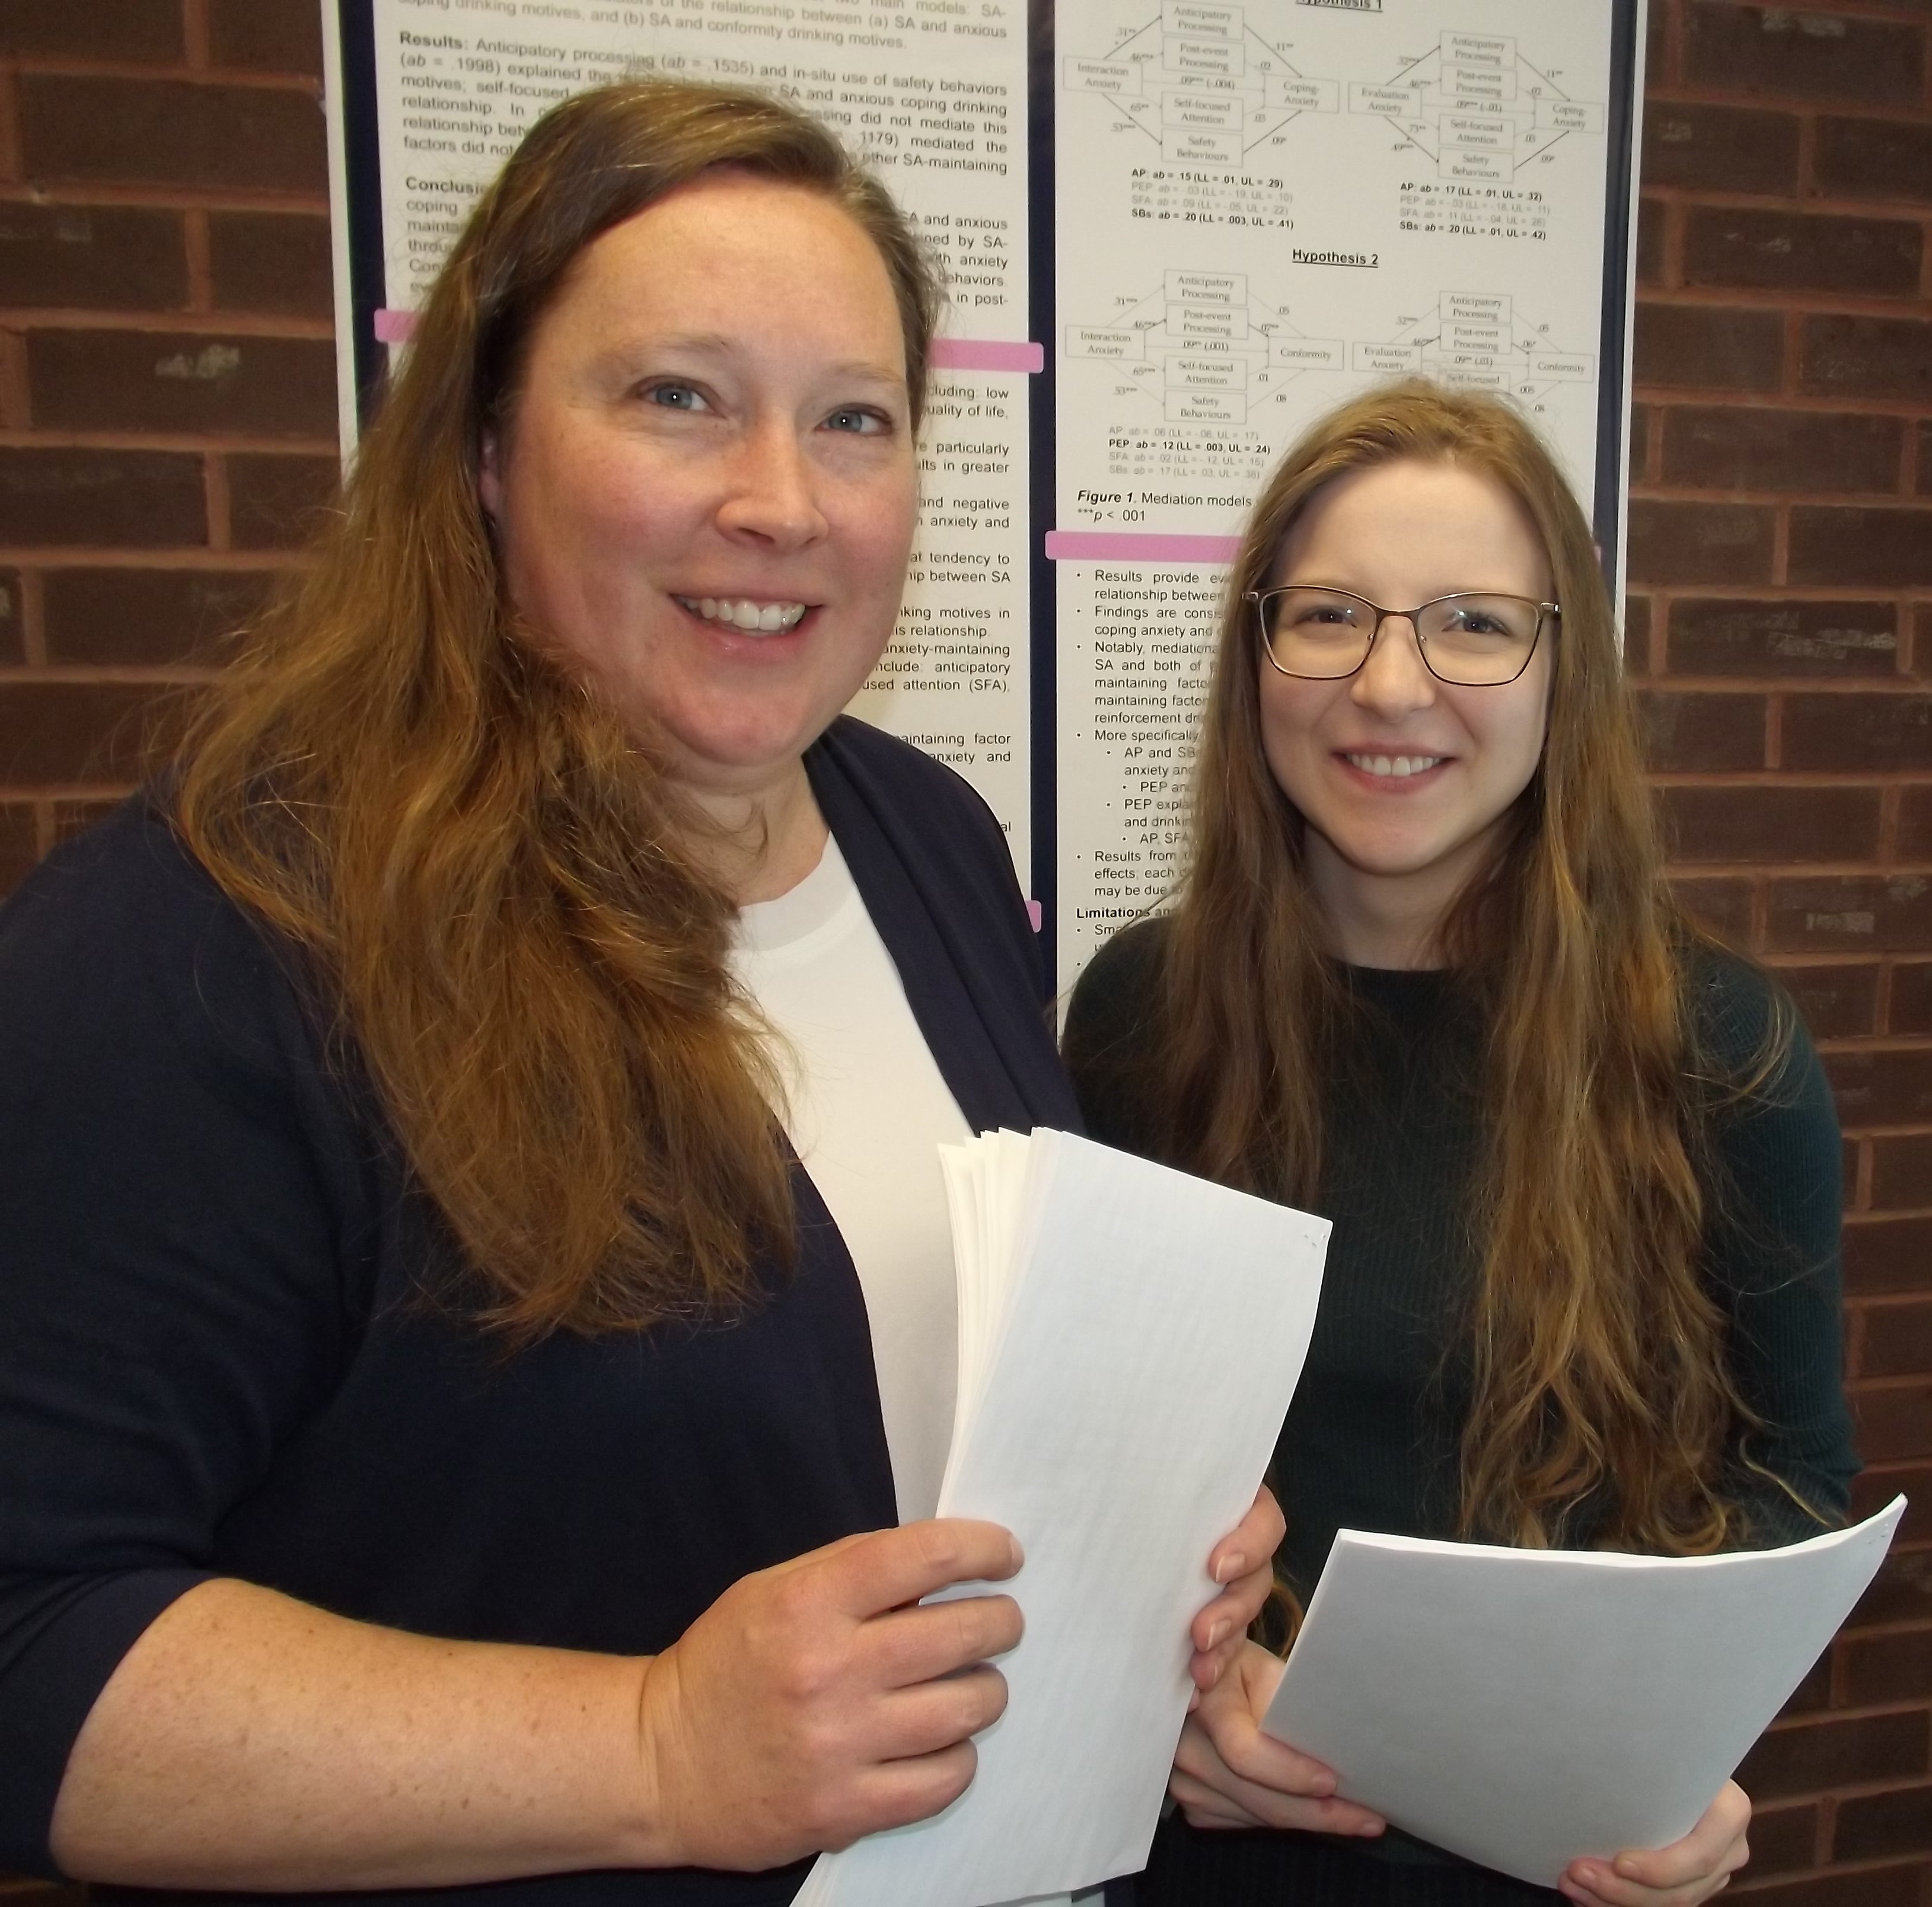 Dr. Amanda Maranzan, left, an associate professor in Lakehead's department of psychology, is leading a project examining the stigma experienced by injured workers. Pictured alongside her is graduate student Lauren Reynolds.